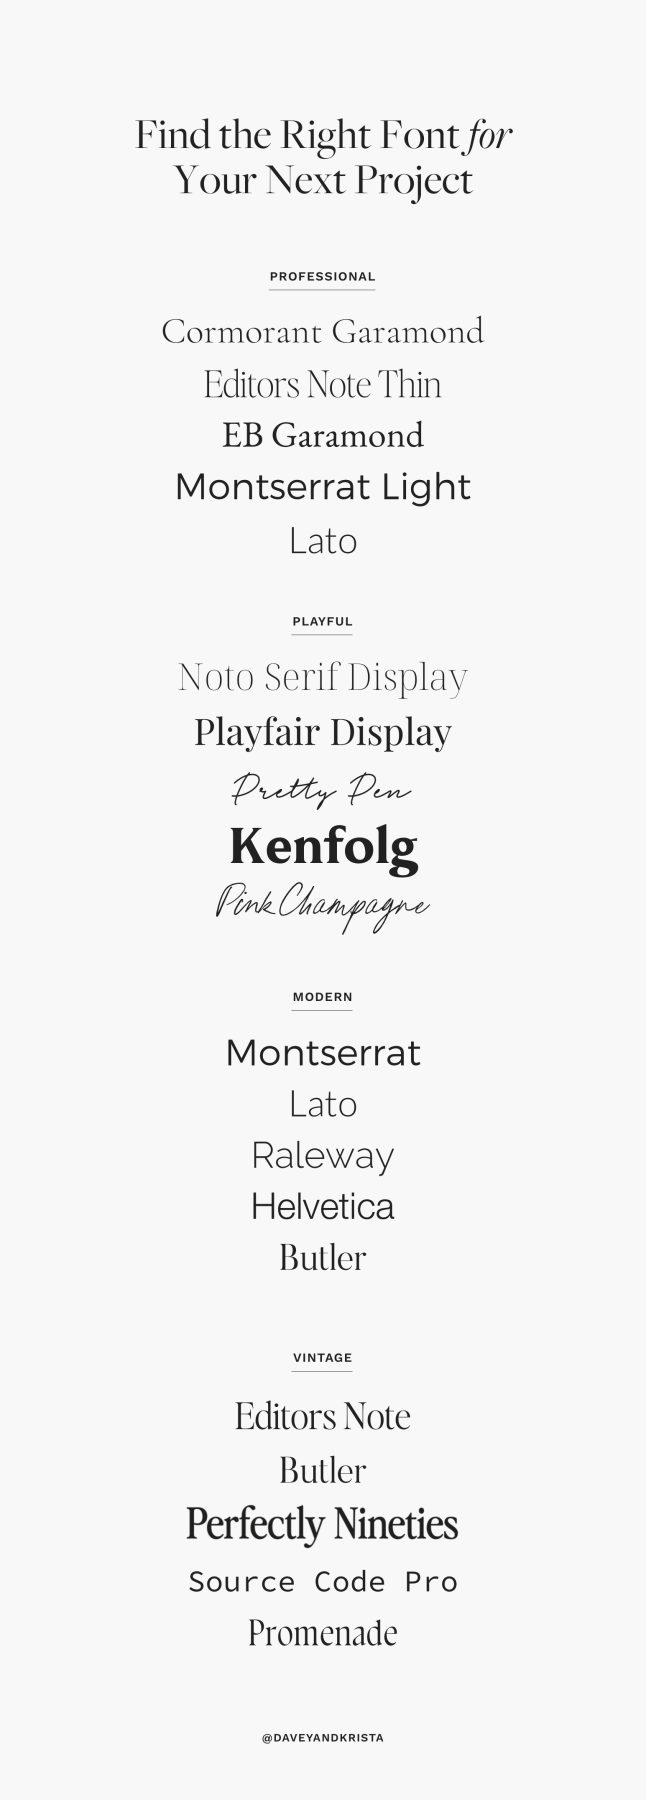 Find the right font for your next project. Professional, playful, modern and vintage inspired fonts. 
